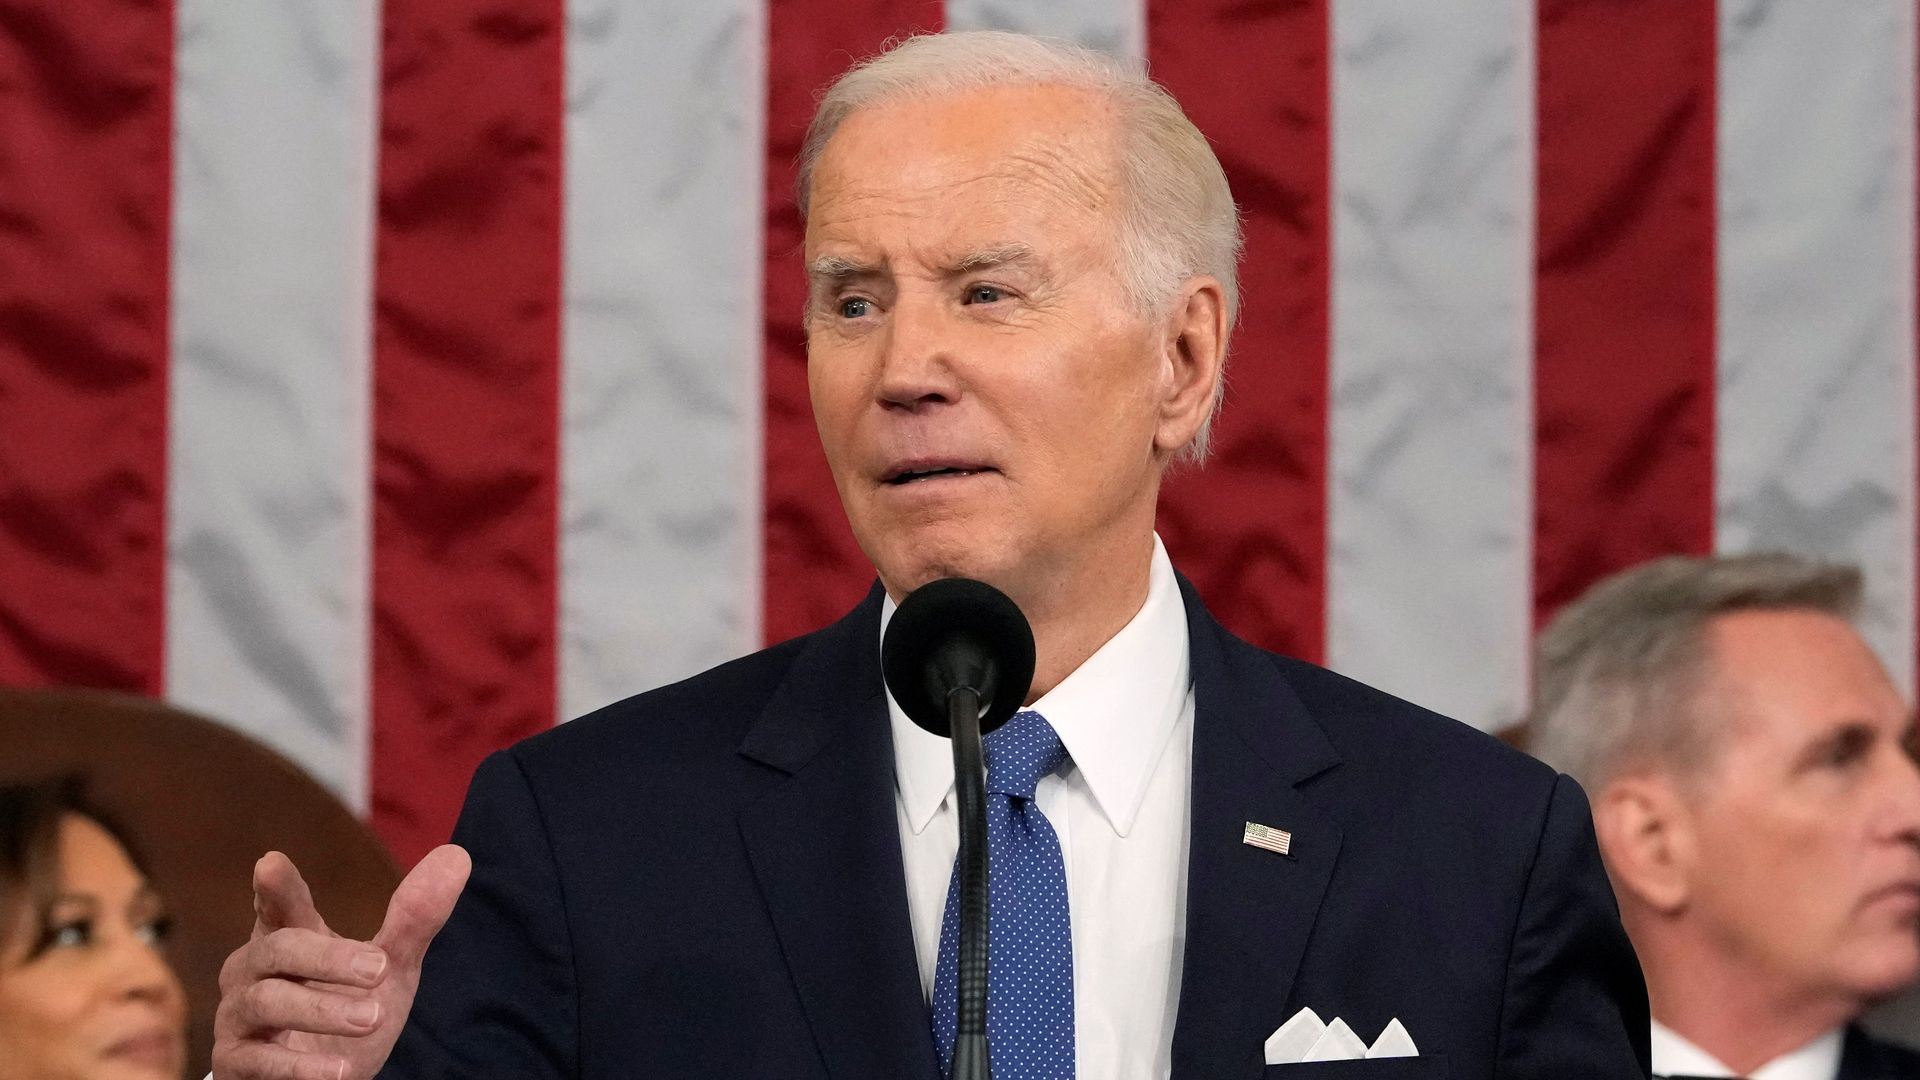 The Biden administration is coddling Iran to avoid further conflict and bolster his chances for reelection.